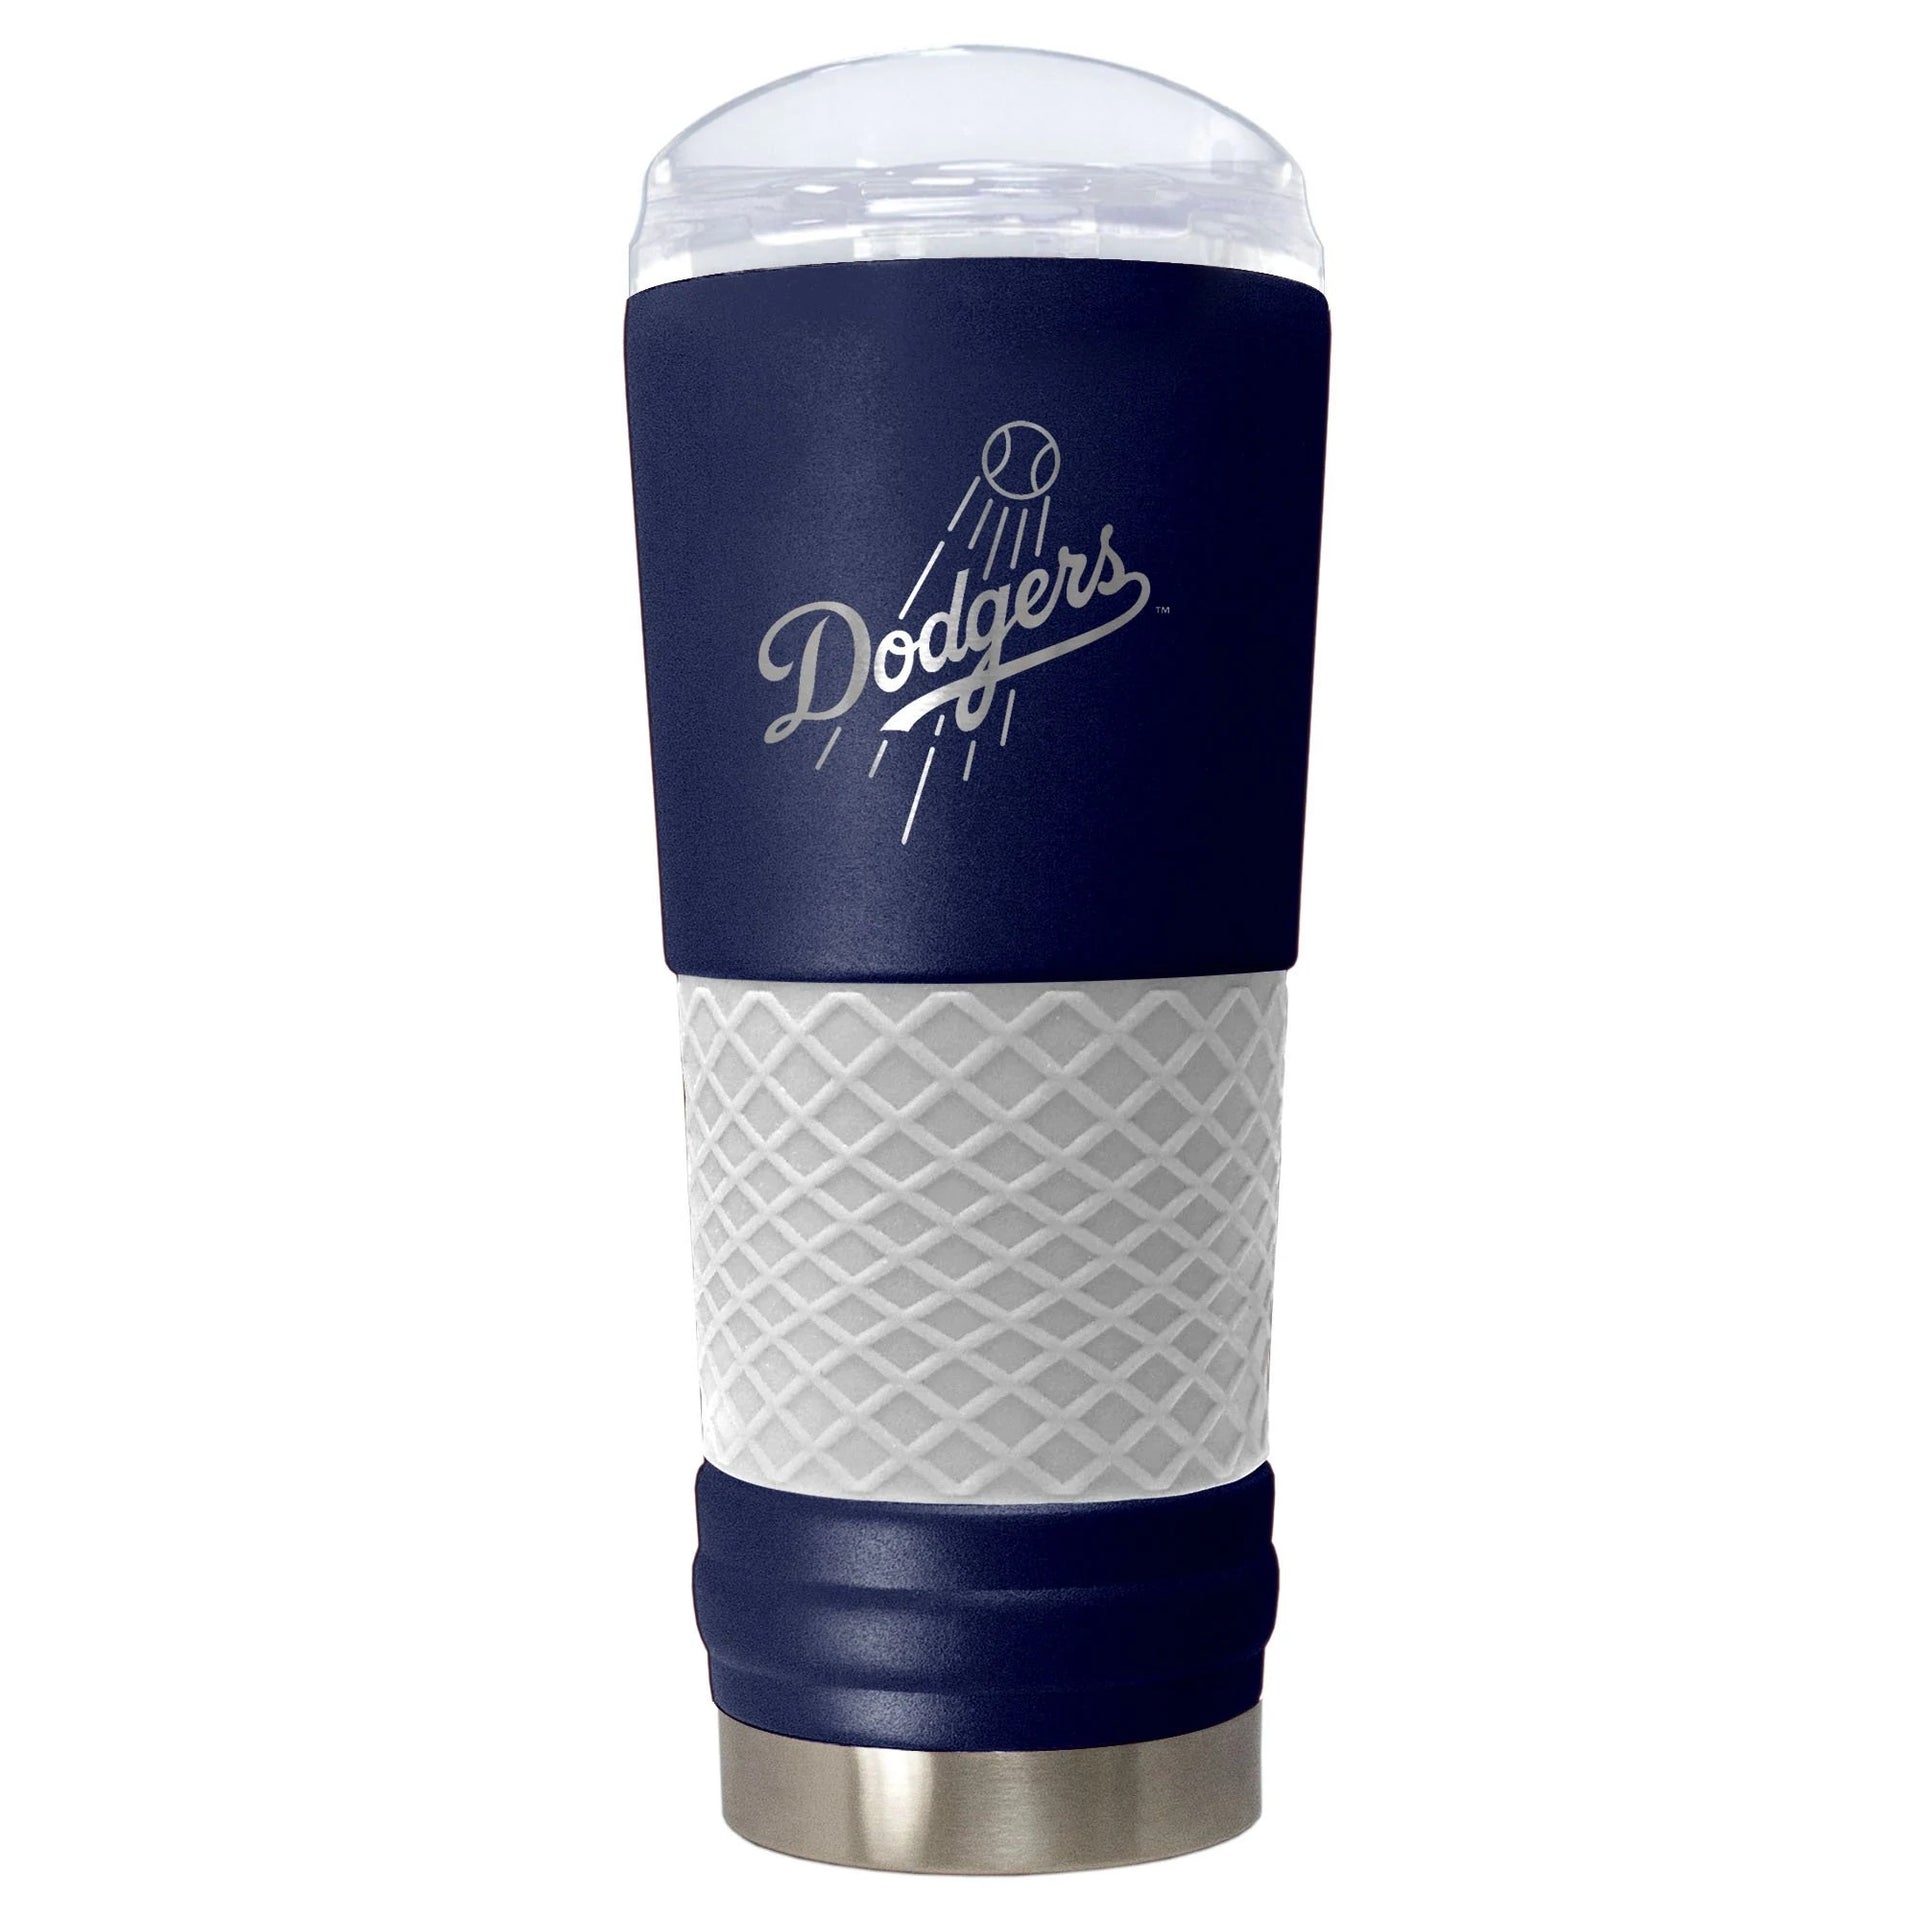 Los Angeles Dodgers "The Draft" 24 oz. Stainless Steel Travel Tumbler - Dynasty Sports & Framing 